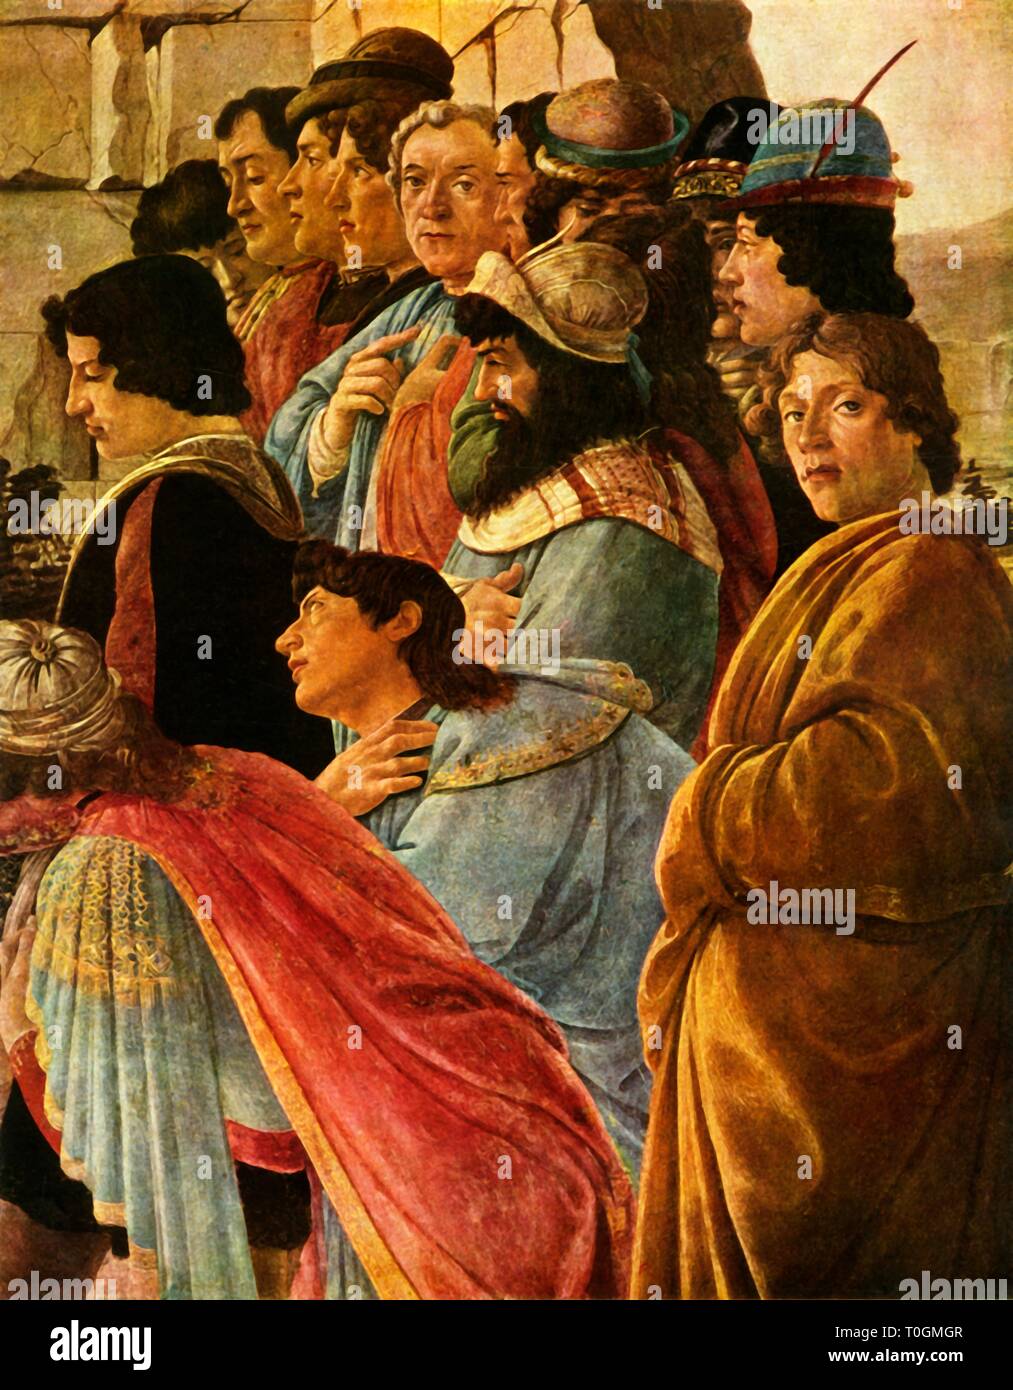 Detail from the 'Adoration of the Magi' with self portrait of Botticelli, 1475, (1937). Creator: Sandro Botticelli. Stock Photo